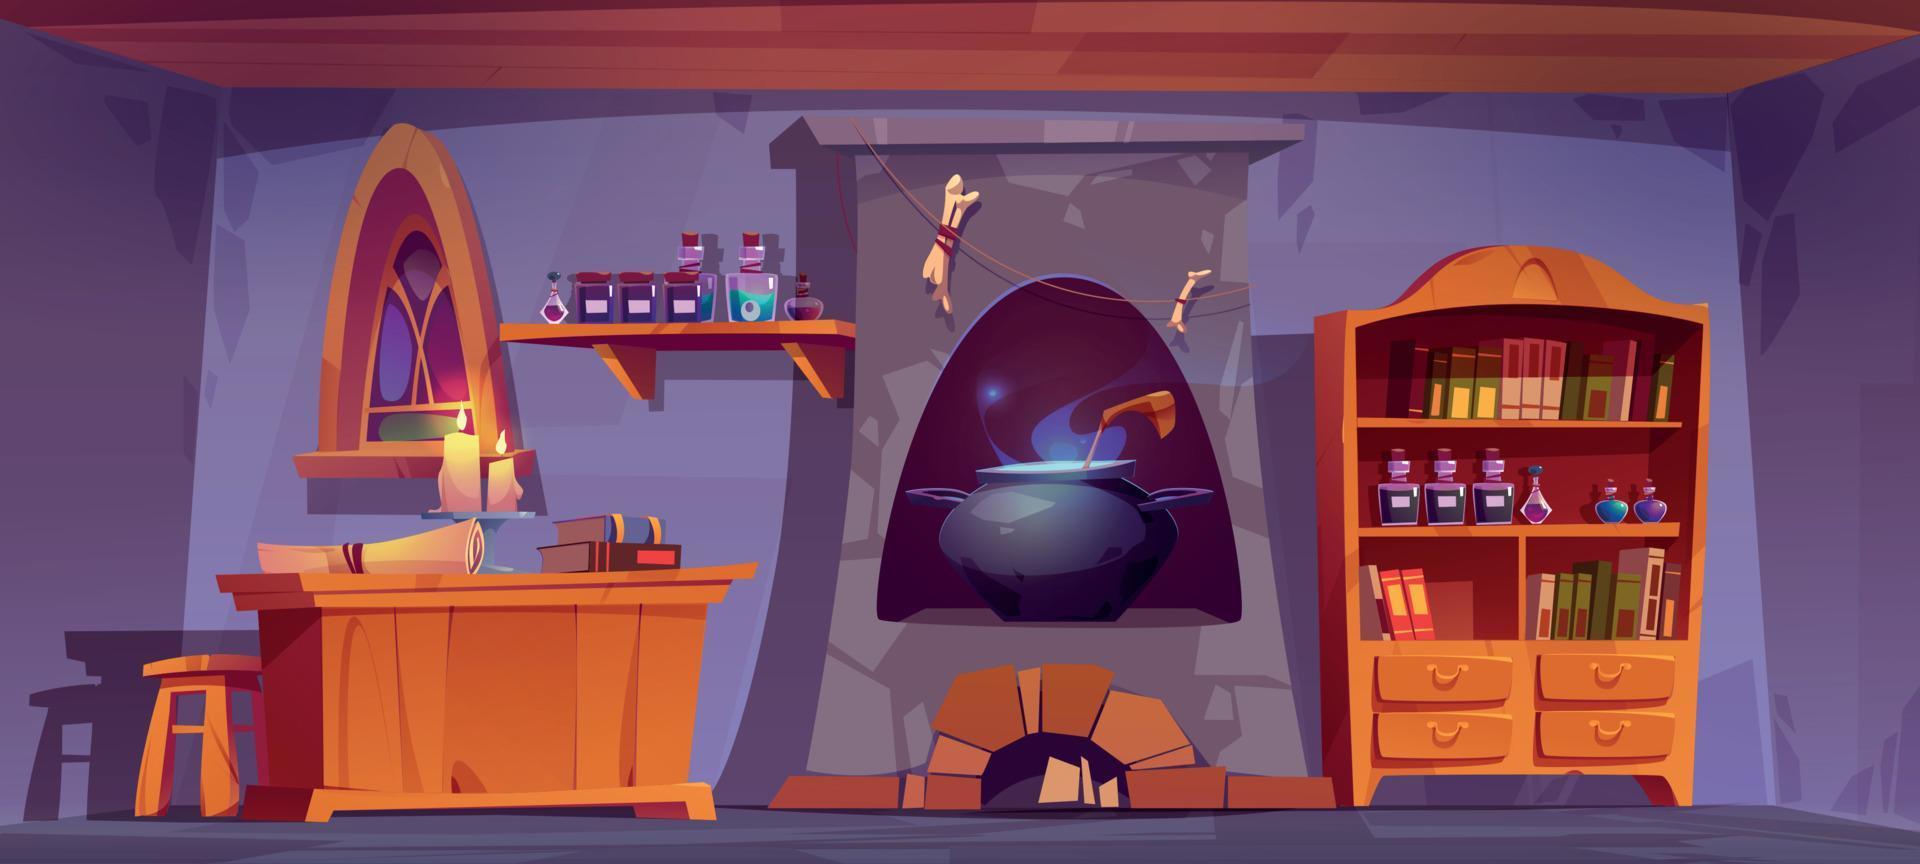 Magic potions shop interior with furniture vector